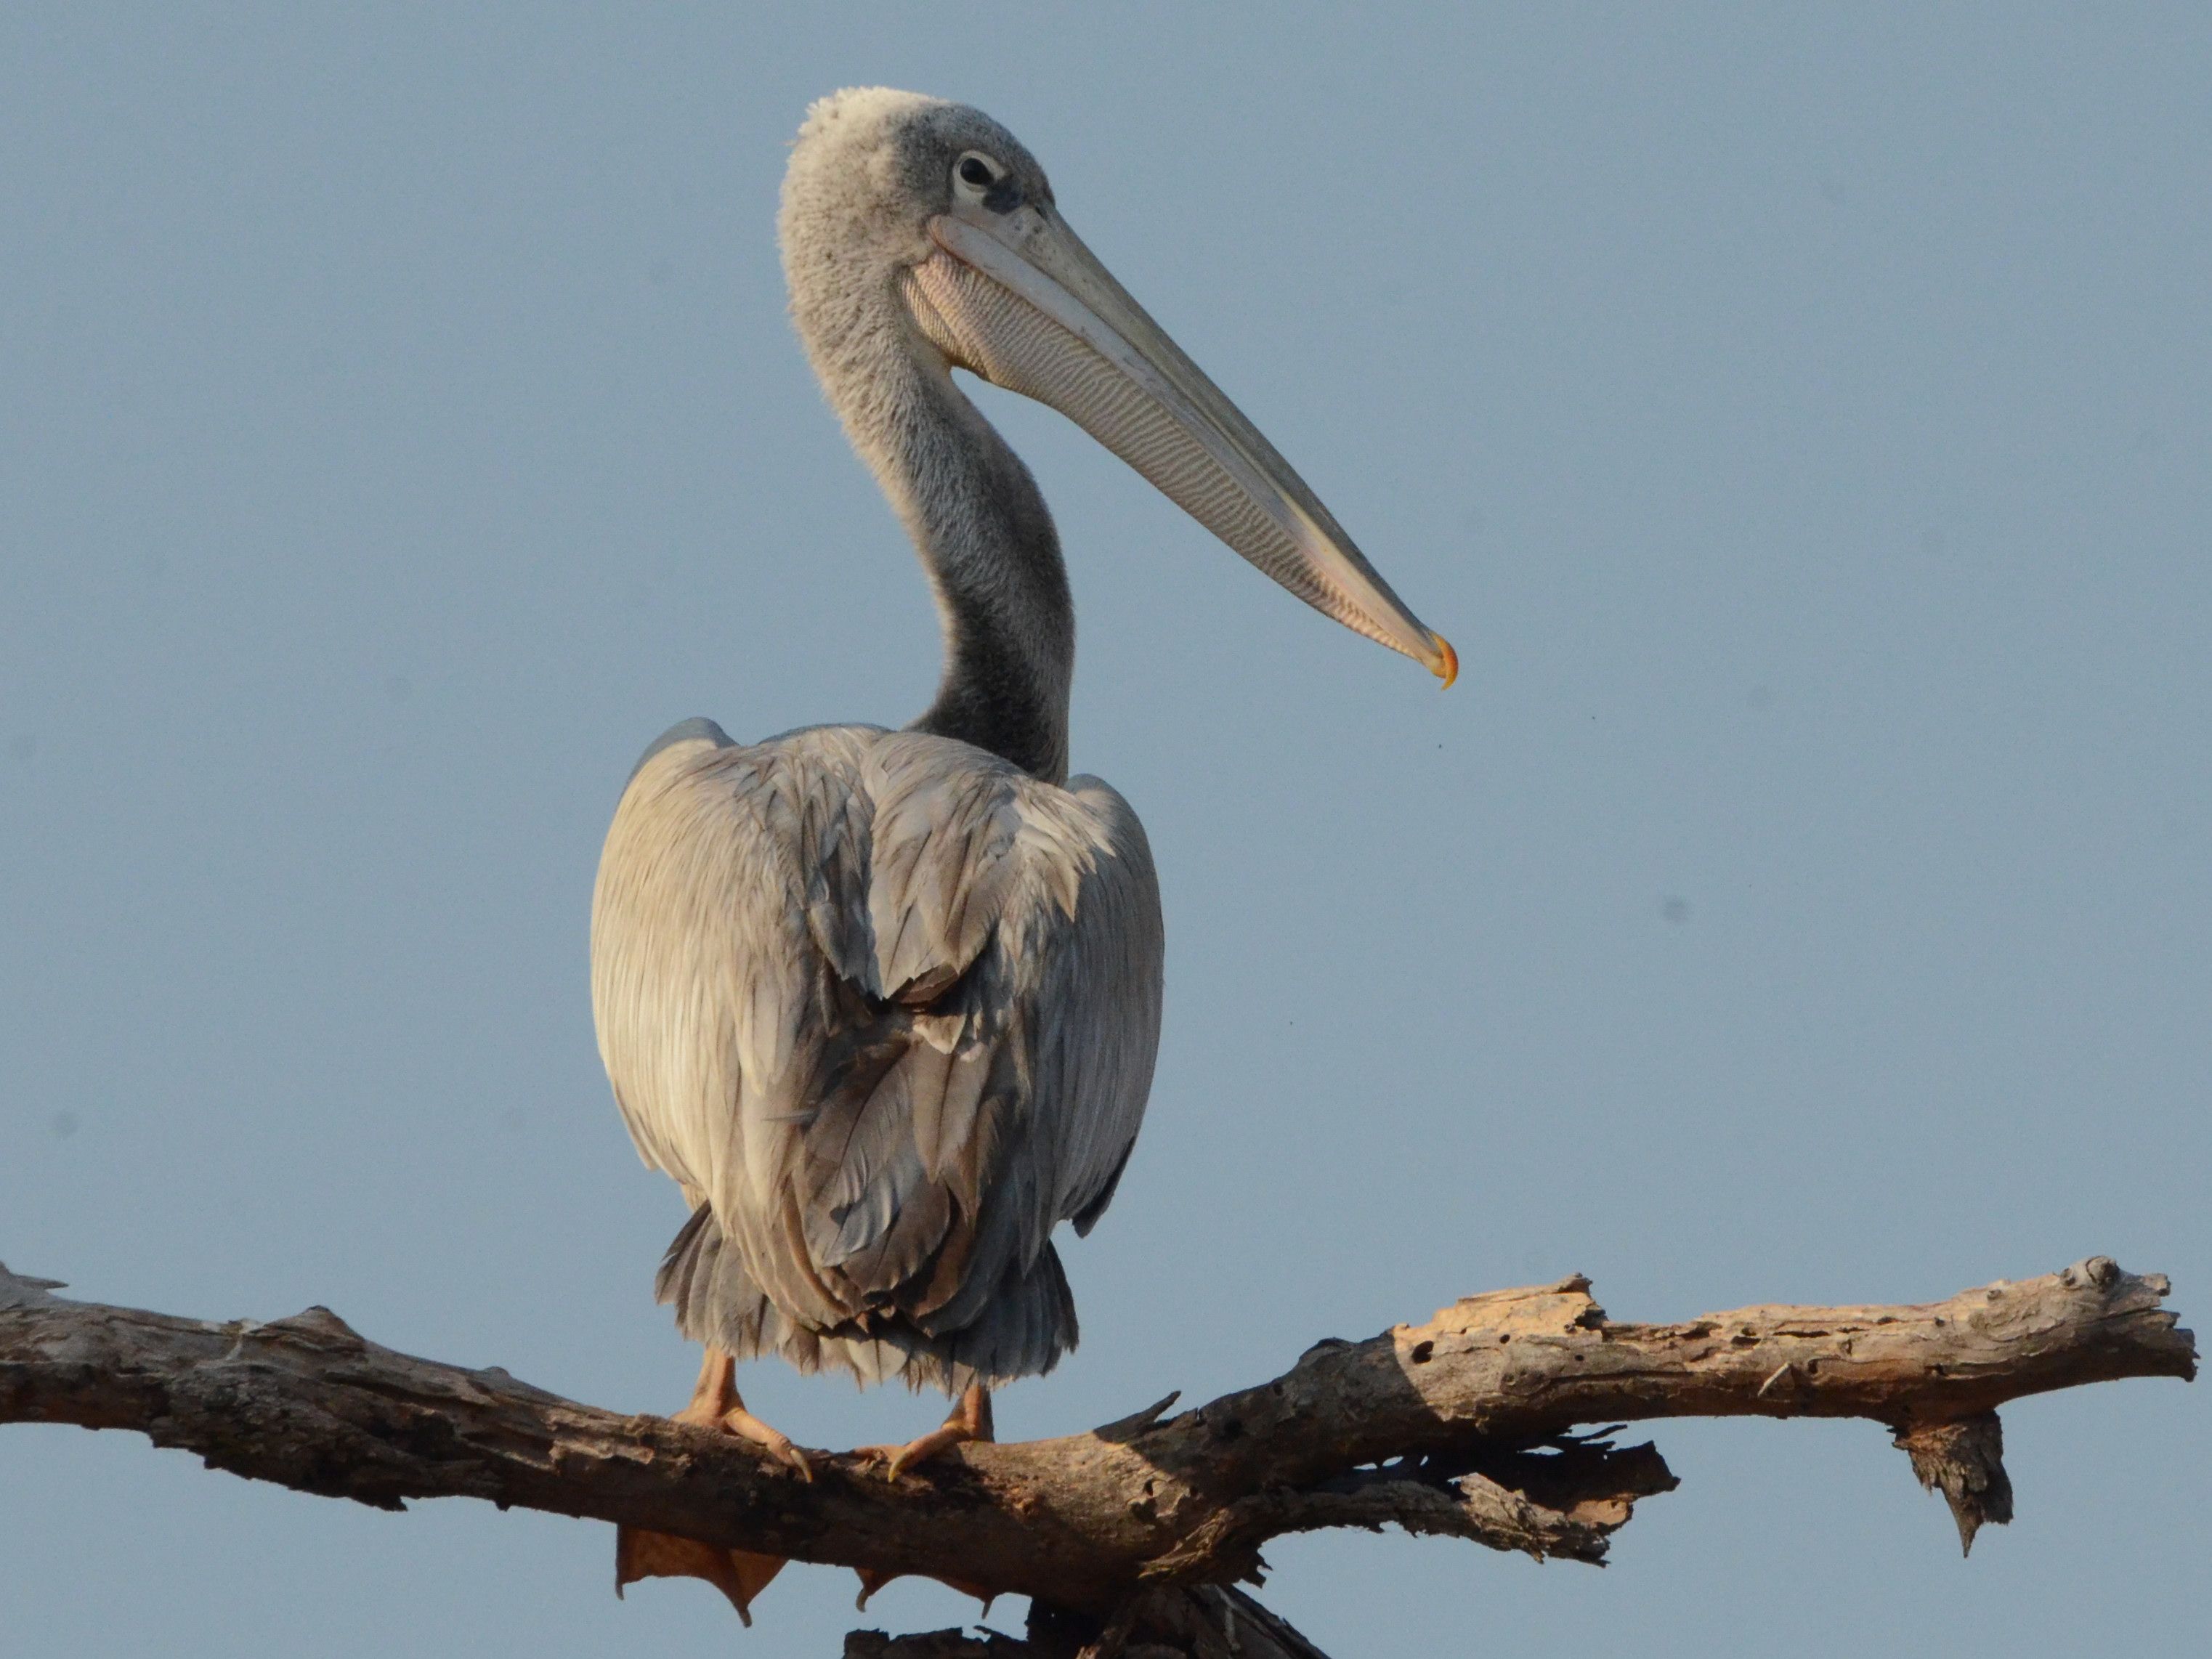 Click picture to see more Pink-backed Pelicans.